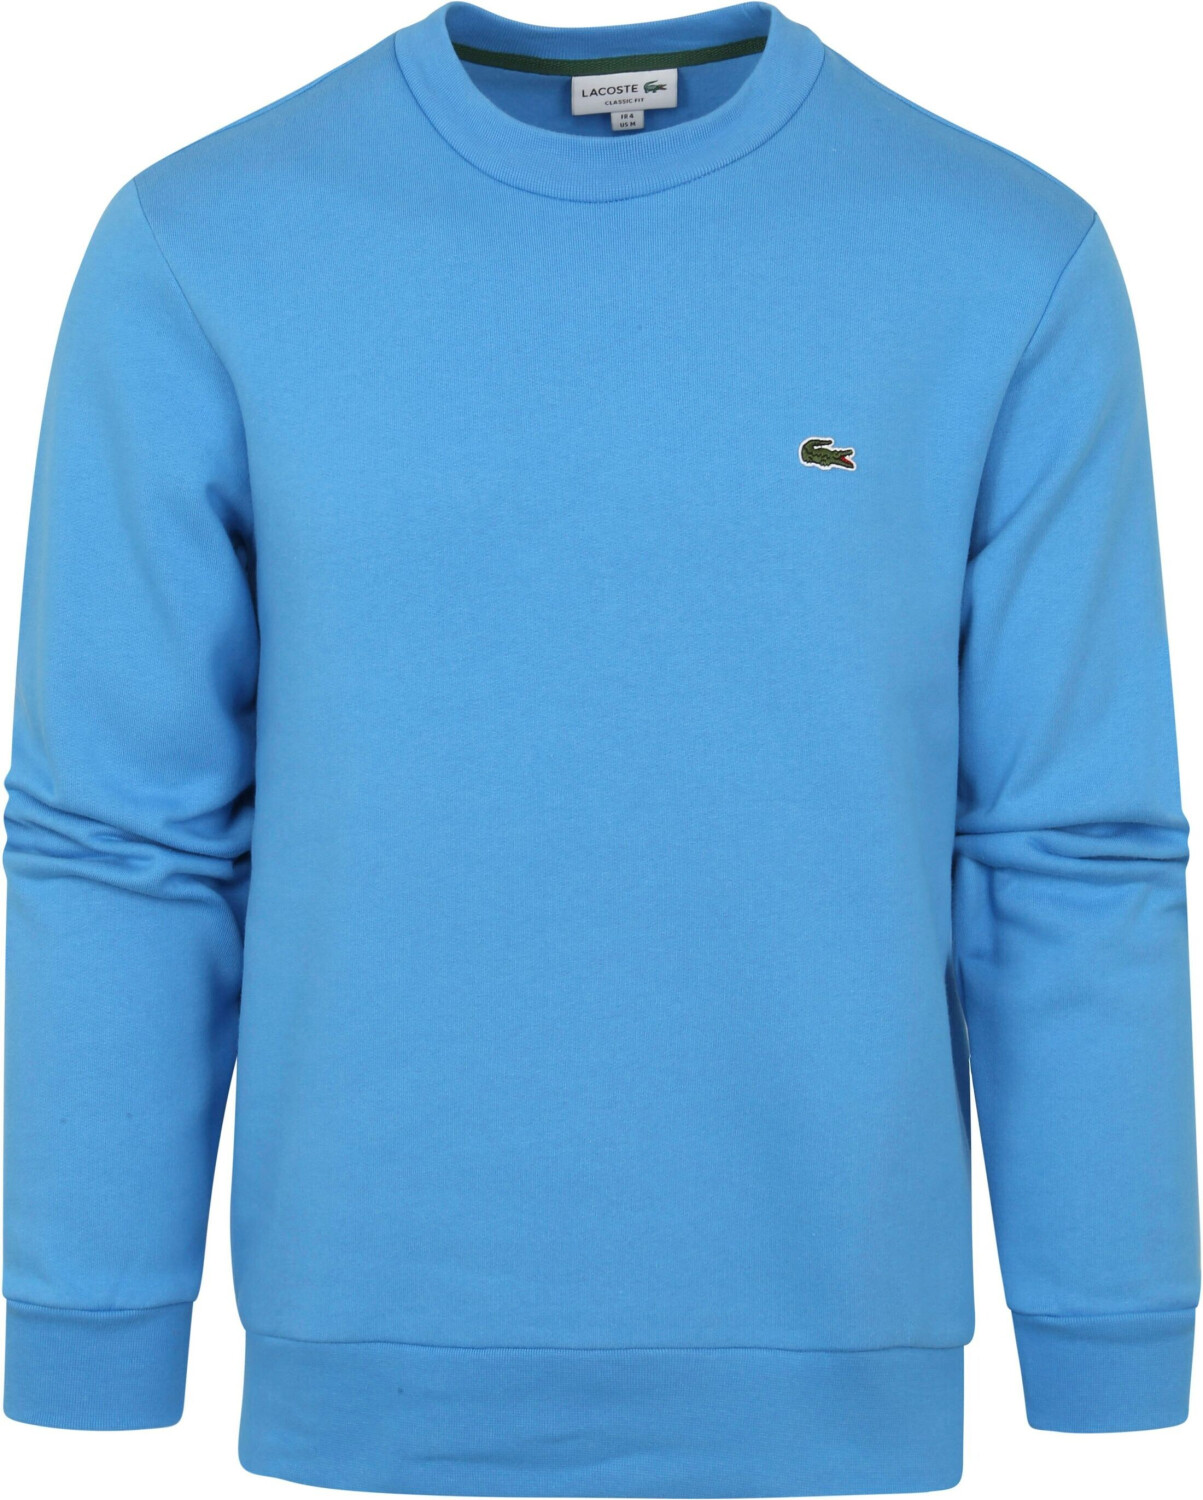 (Today) blue Sweatshirts argentine £68.00 Buy on (SH9608) – Best Deals from Lacoste